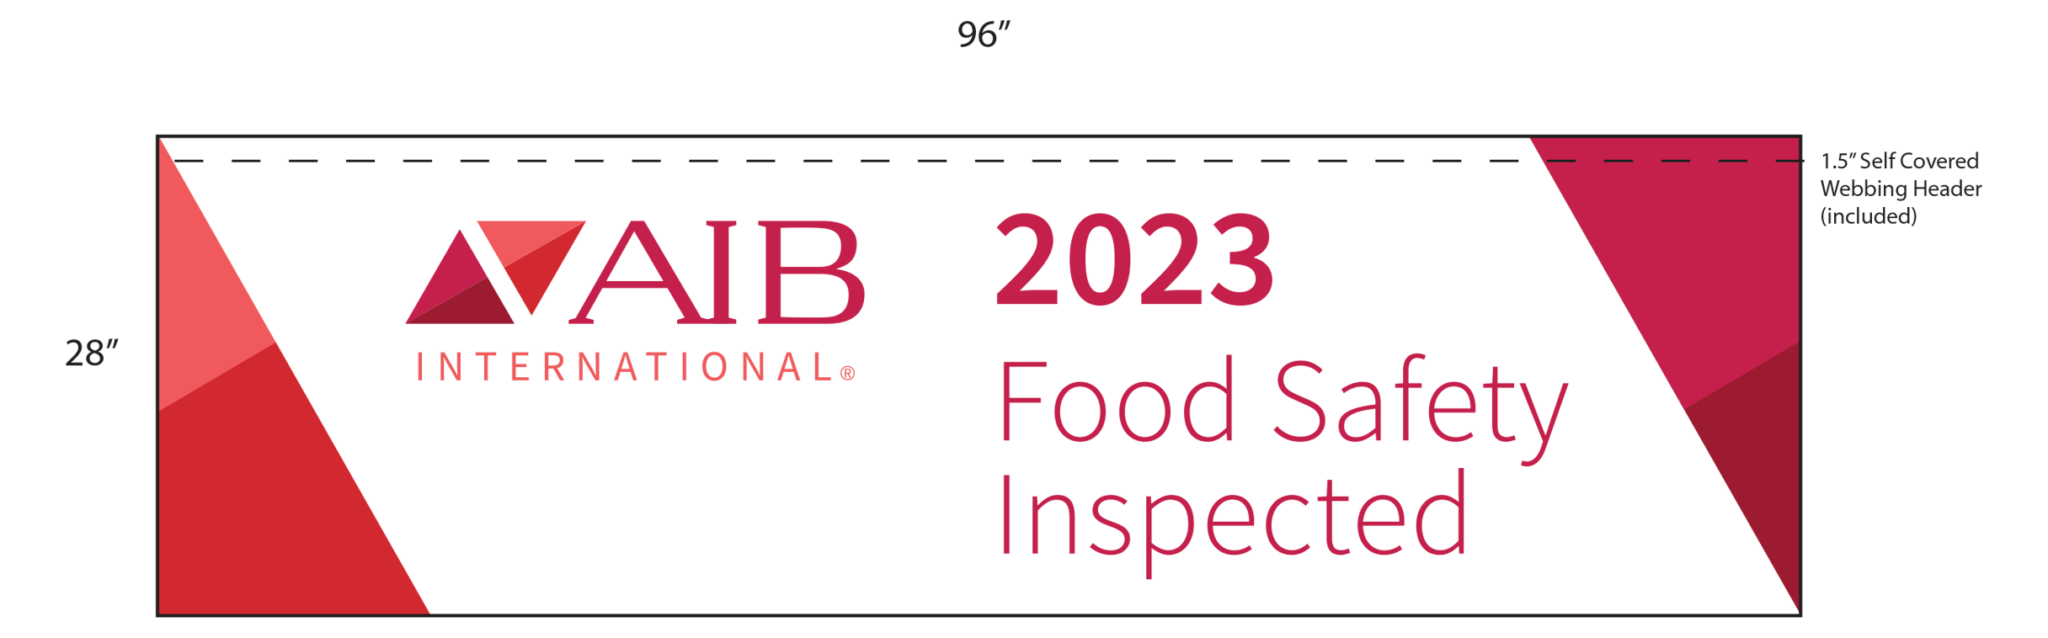 2023 Food Safety Inspected Banner